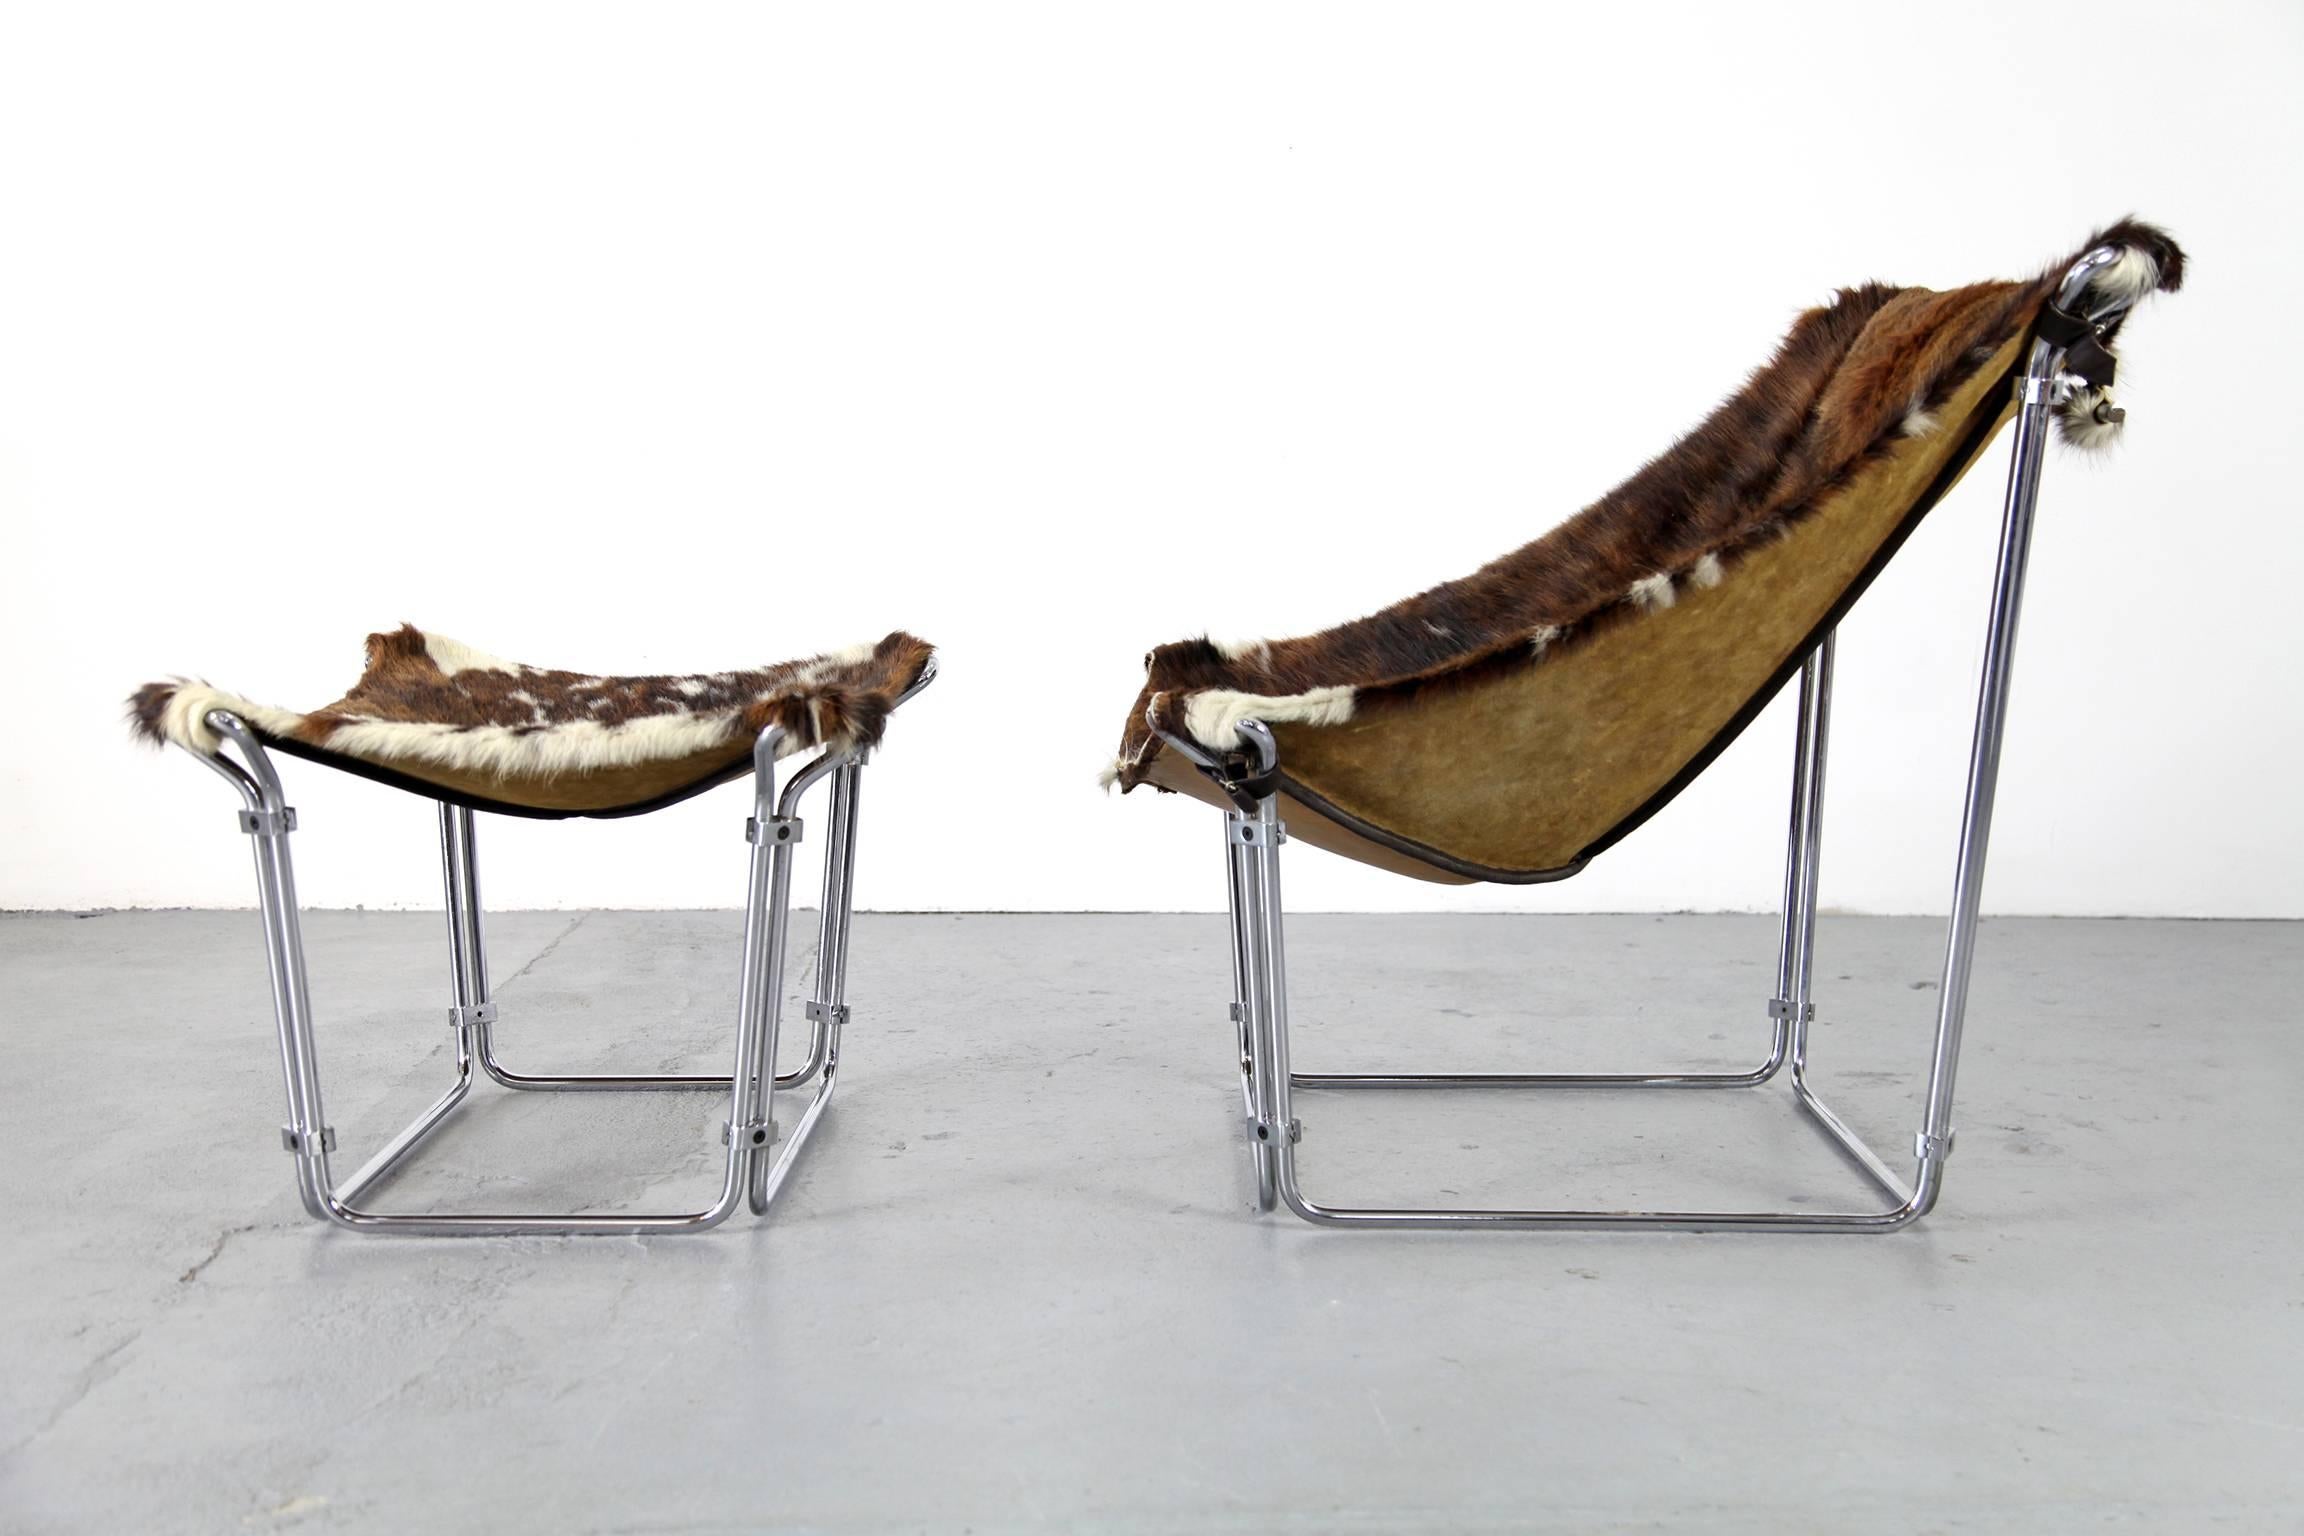 Lounge chair with ottoman by Kwok Hoi Chan produced by Steiner, Paris. Extravagant design made of tubular steel, covered with a beautiful hide. Excellent state of use.

